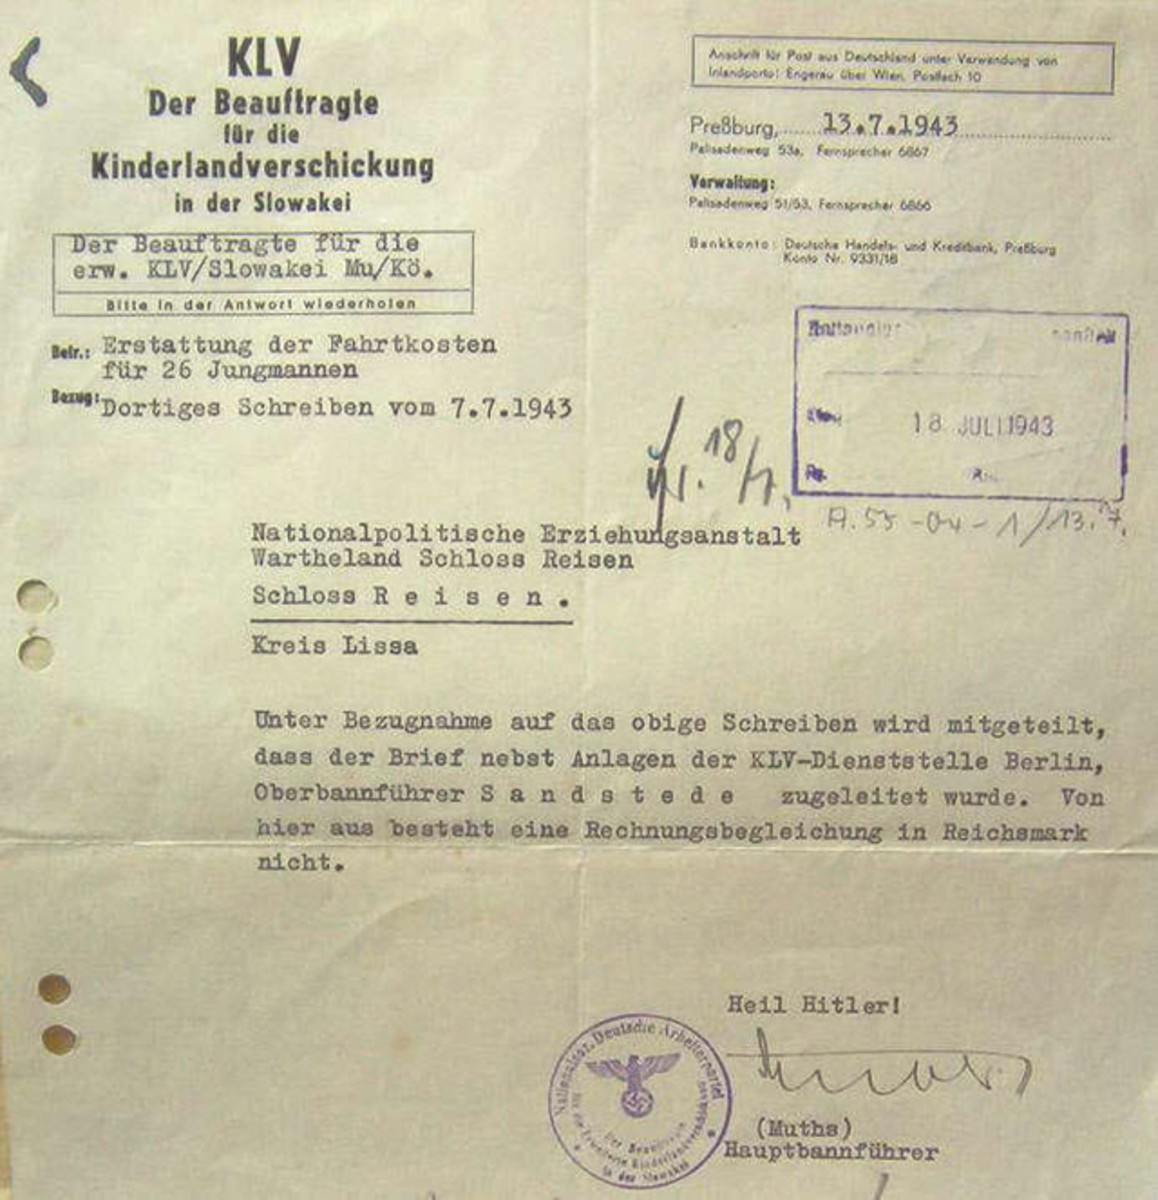 A letter from Hitler Youth Hauptbahnführer Muths, the KLV representative in Slovakia, to the National Political Educational Institute (NAPOLA) at Castle Reisen in the district of Lissa in Gau Wartheland in which he repsonds to a letter from the NAPOLA requesting reimbursement for travel costs for twenty-six youths. The Hauptbannführer indicated he had no way of determining the travel costs in Reichsmarks, and so has sent the NAPOLA’s request to Oberbannführer Sandstede, a Hitler Youth official at the KLV office in Berlin. What ties this letter into the KLV’s evacuation program rather than its recreational program is the abbreviation “erw.” in the box at the upper left hand corner of the letter. This stands for “Erweiterter” (expanded). A copy of this letter was also sent to Der Beaugtragte für die erw. KLV/Slowakei Mu/Kö. (The representative of the Expanded KLV in Slovakia.). This letter confirms the Hitler Youth’s participation in both the recreational KLV program and the Expanded KLV evacuation program.